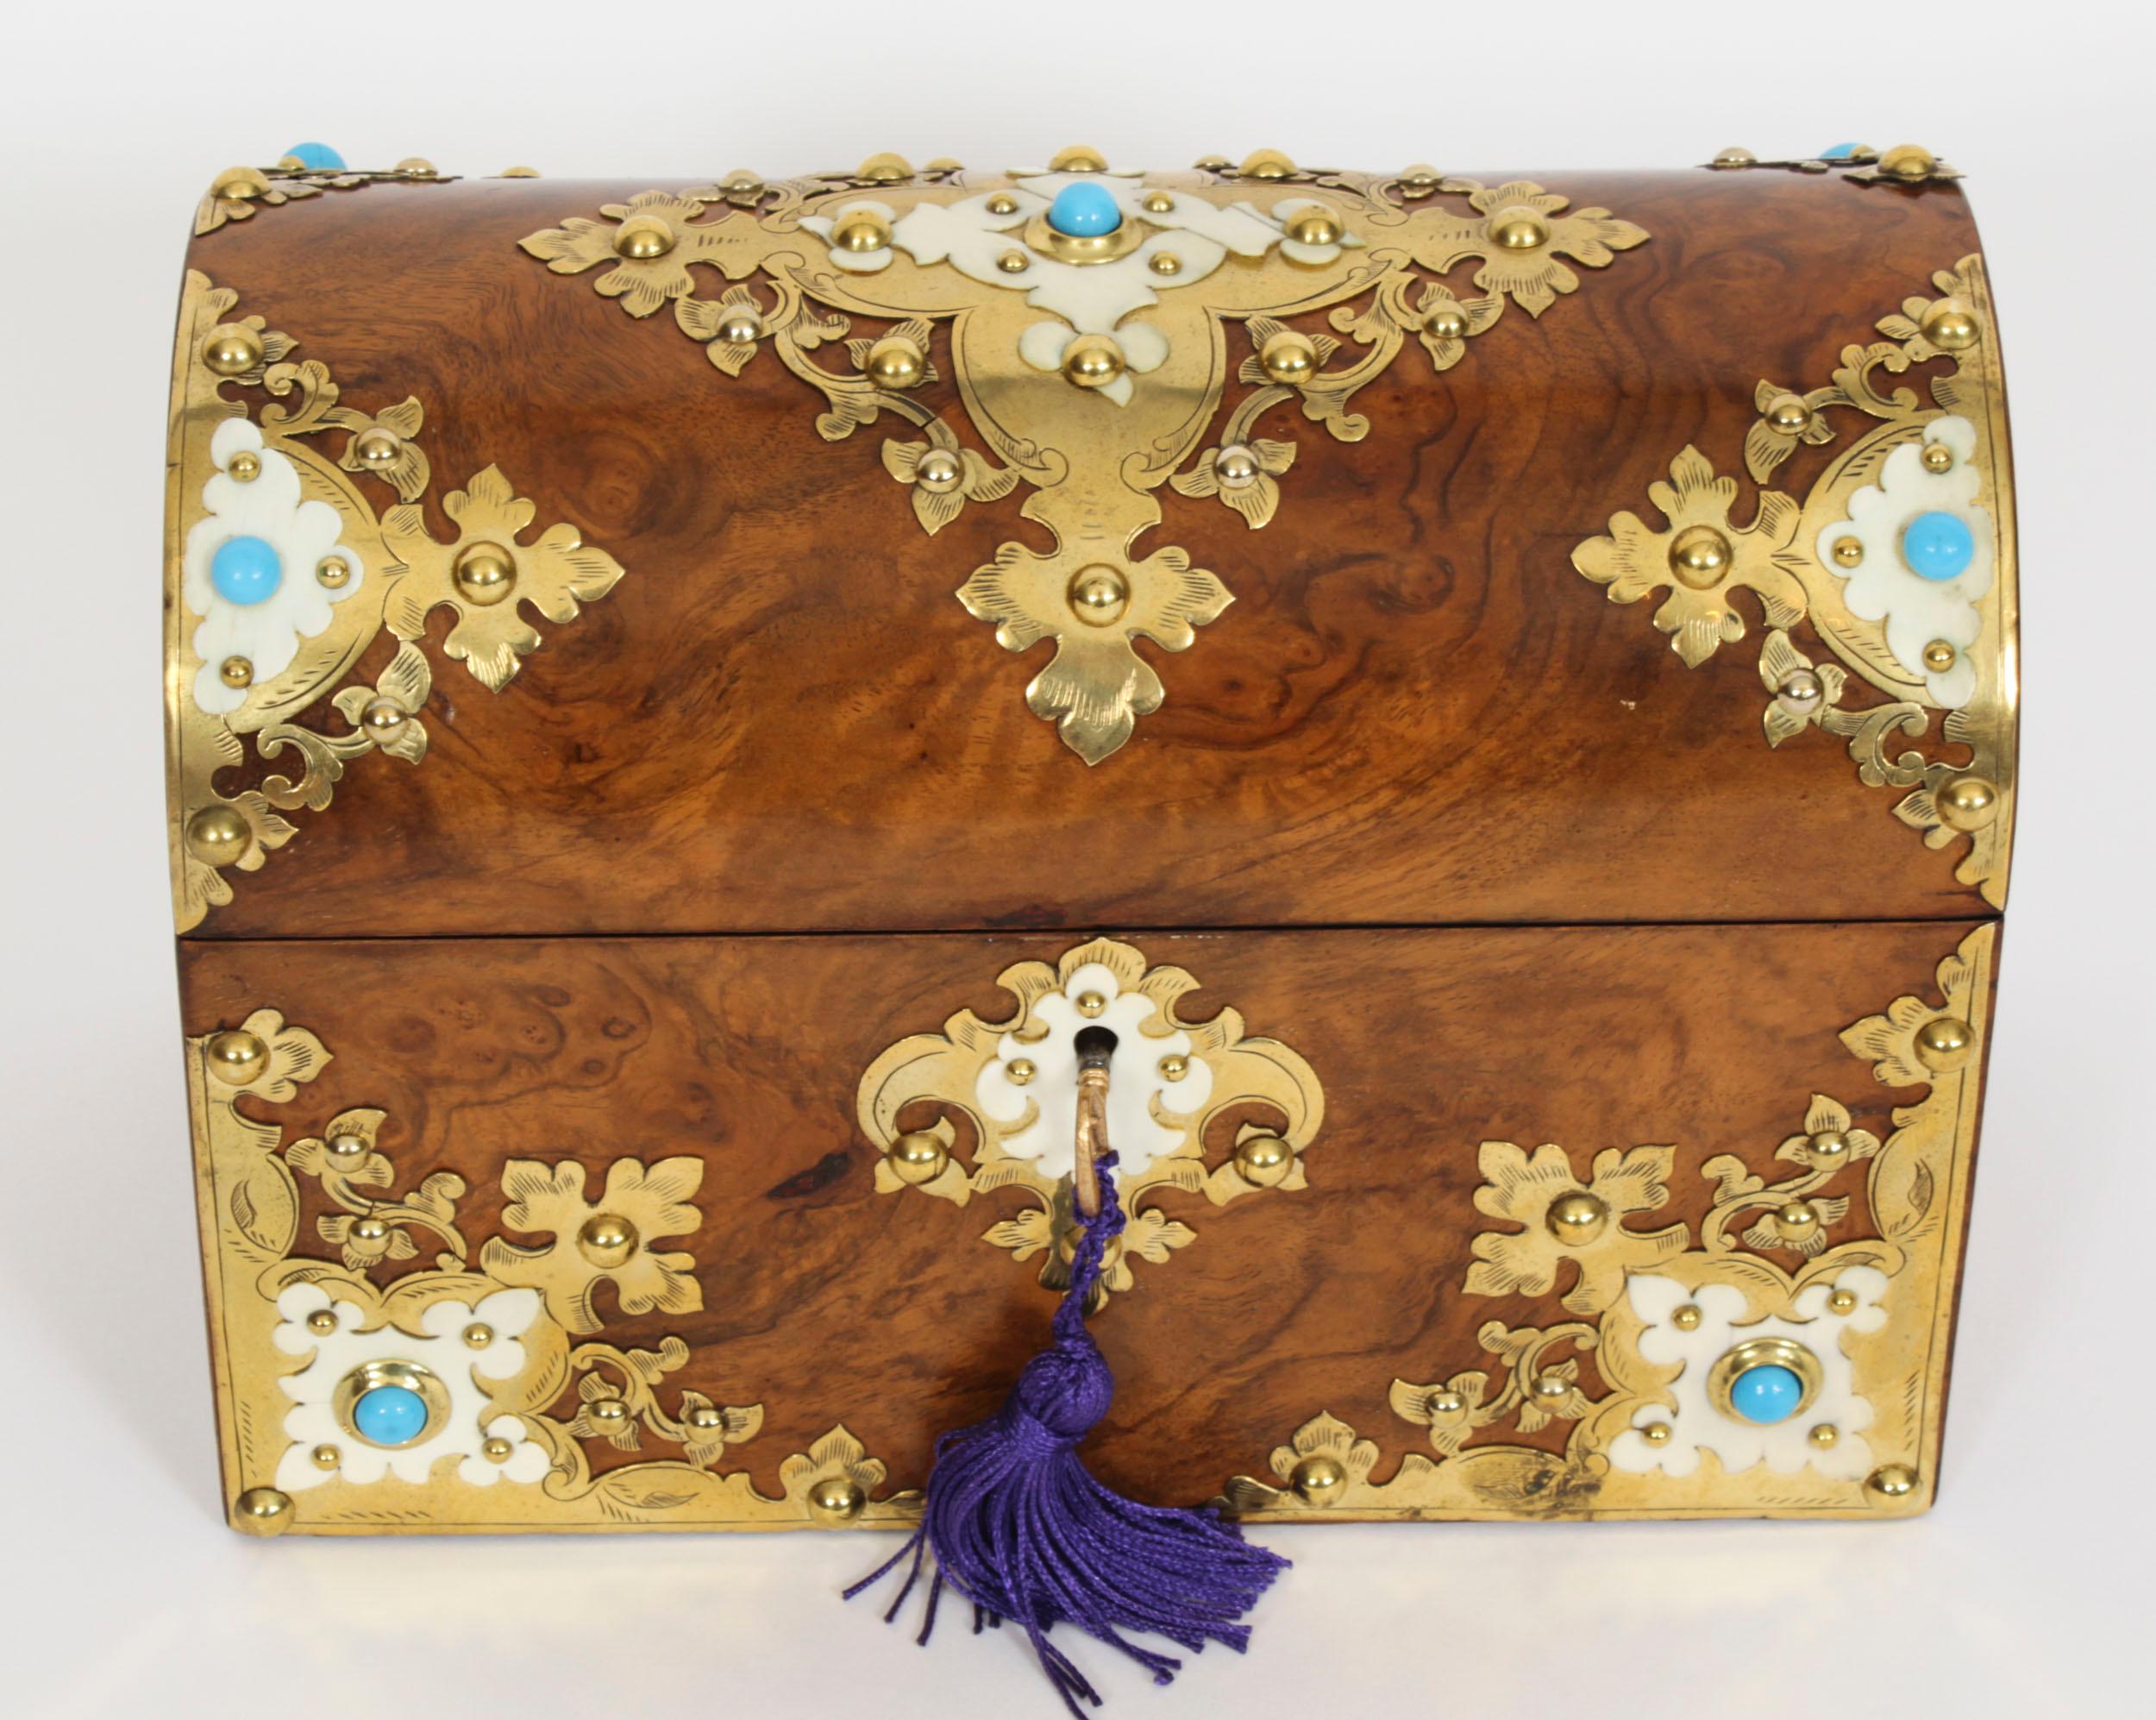 This is a wonderful antique Victorian burr walnut, ivorine, brass and turquoise bead mounted casket, circa 1870 in date.

This wonderful casket has a domed hinged lid with elaborate studded brass fret-work enhanced with ivorine and turquoise bead